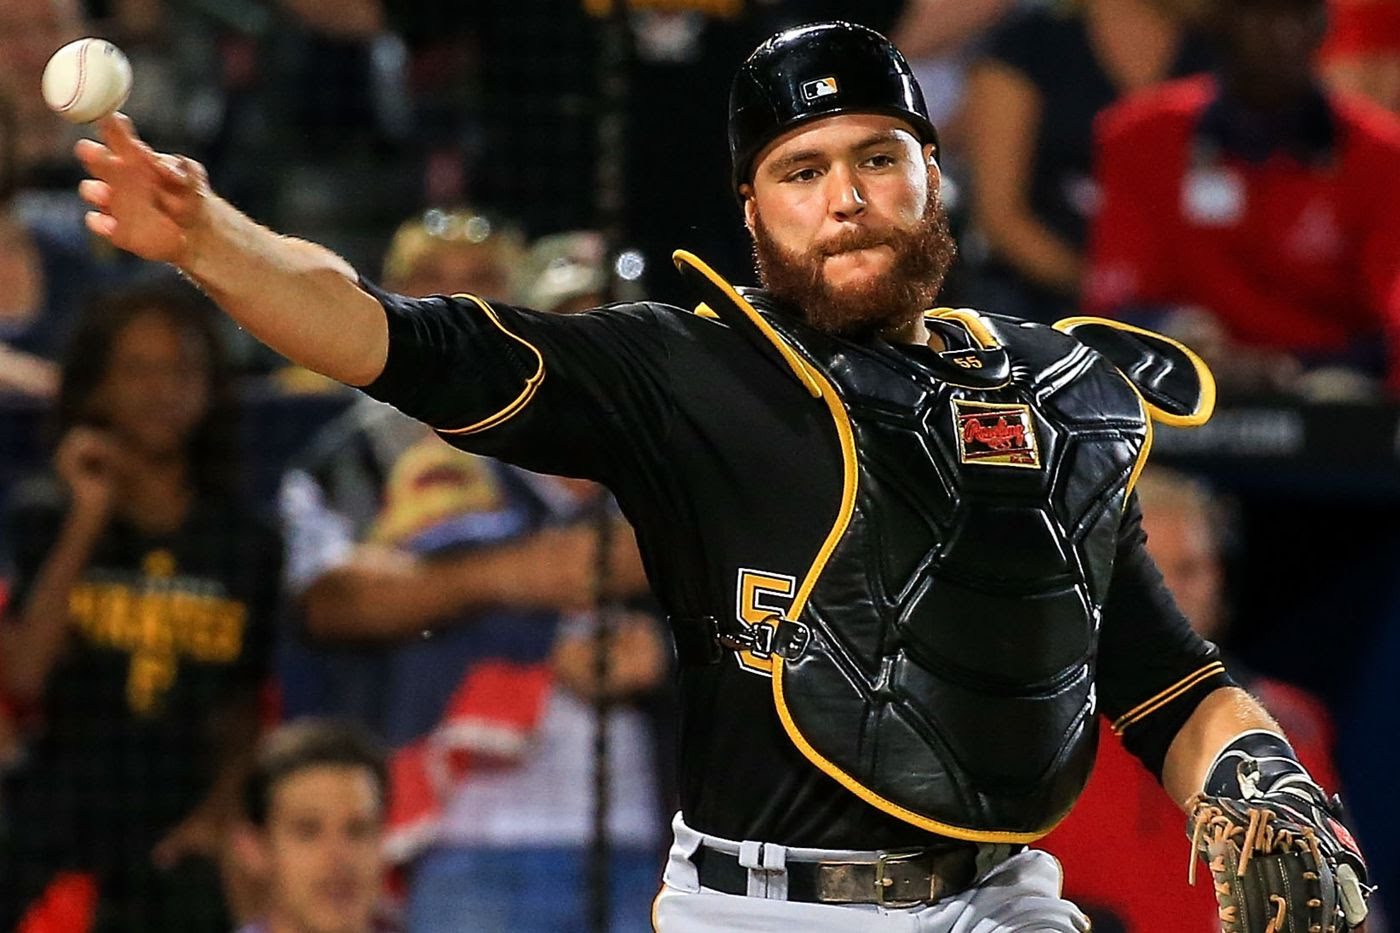 Russell Martin pirates throwing